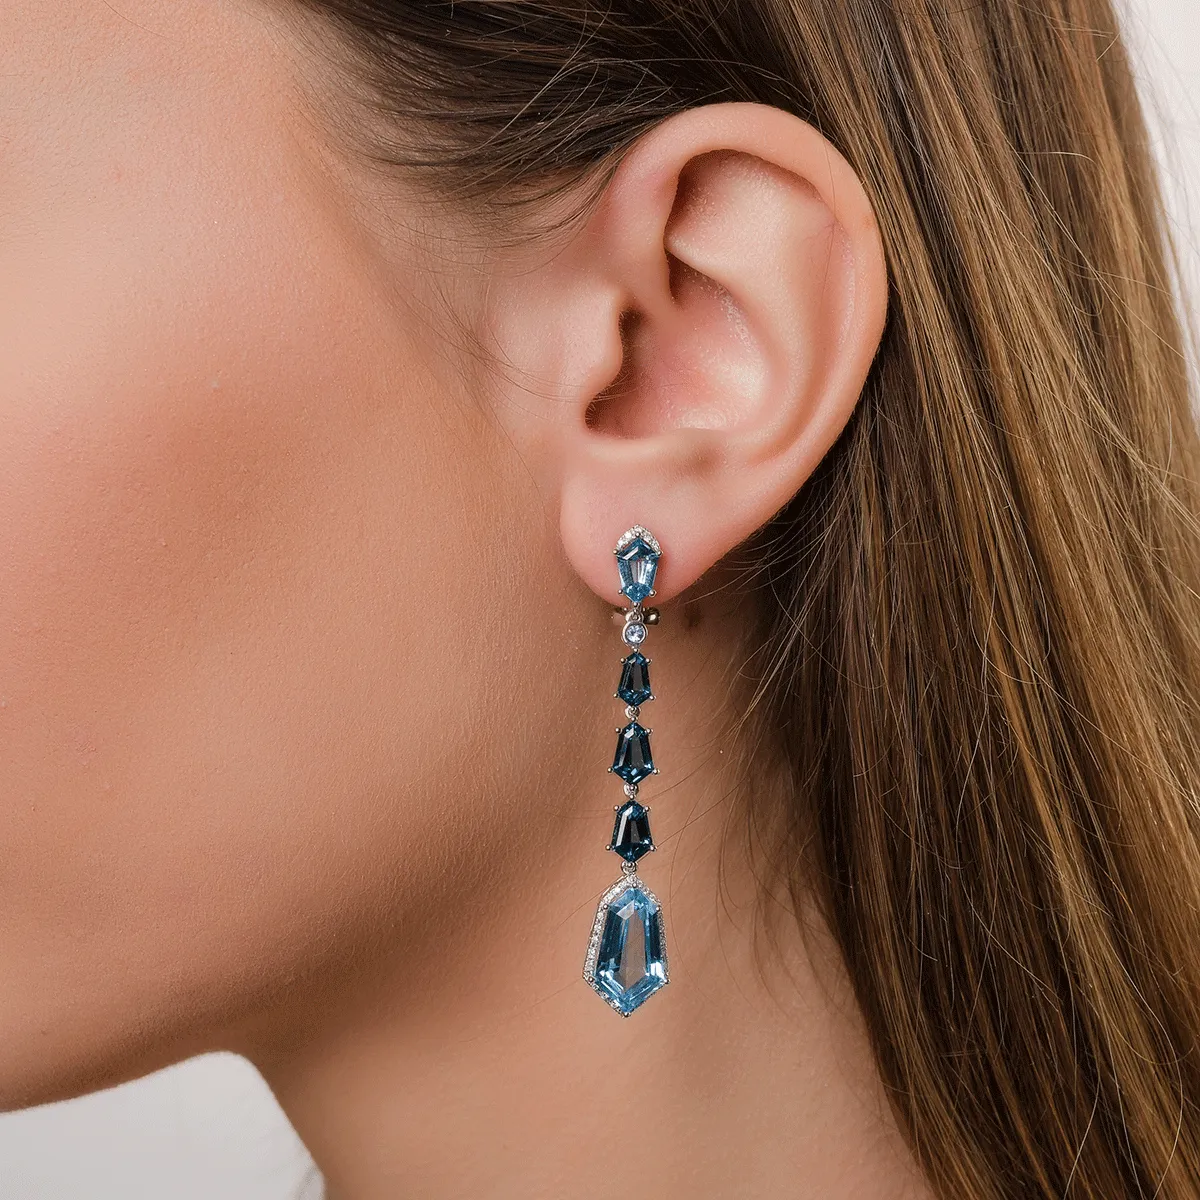 18K white gold earrings with 18.2ct blue topaz